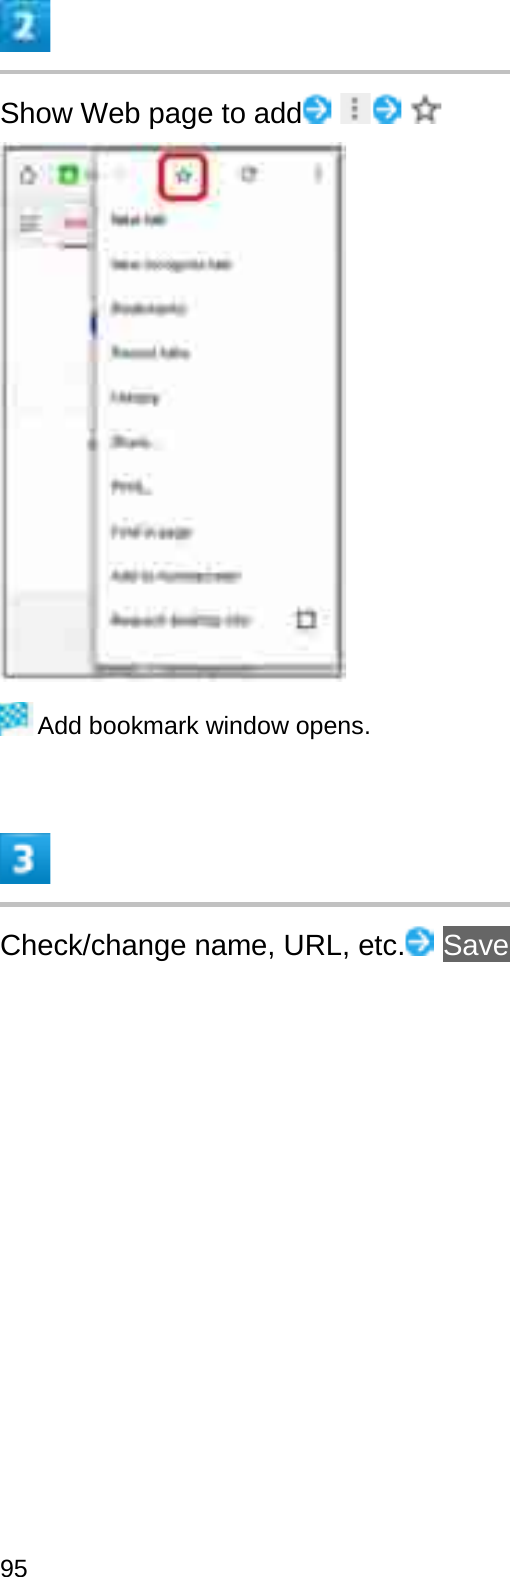 Show Web page to addAdd bookmark window opens.Check/change name, URL, etc. Save95